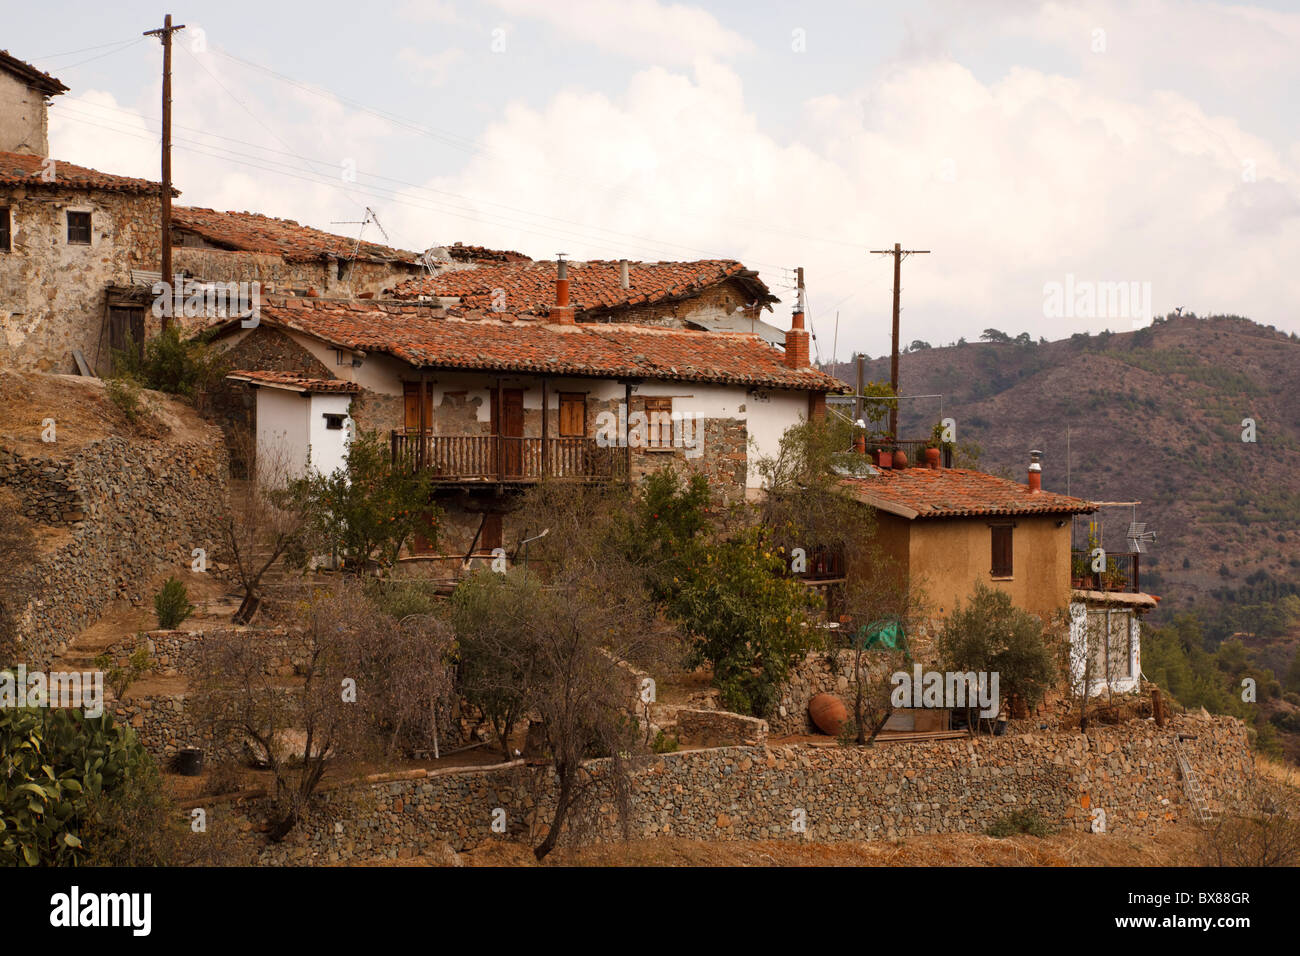 Village of Gourri in the eastern foothills of the Troodos mountains. Stock Photo